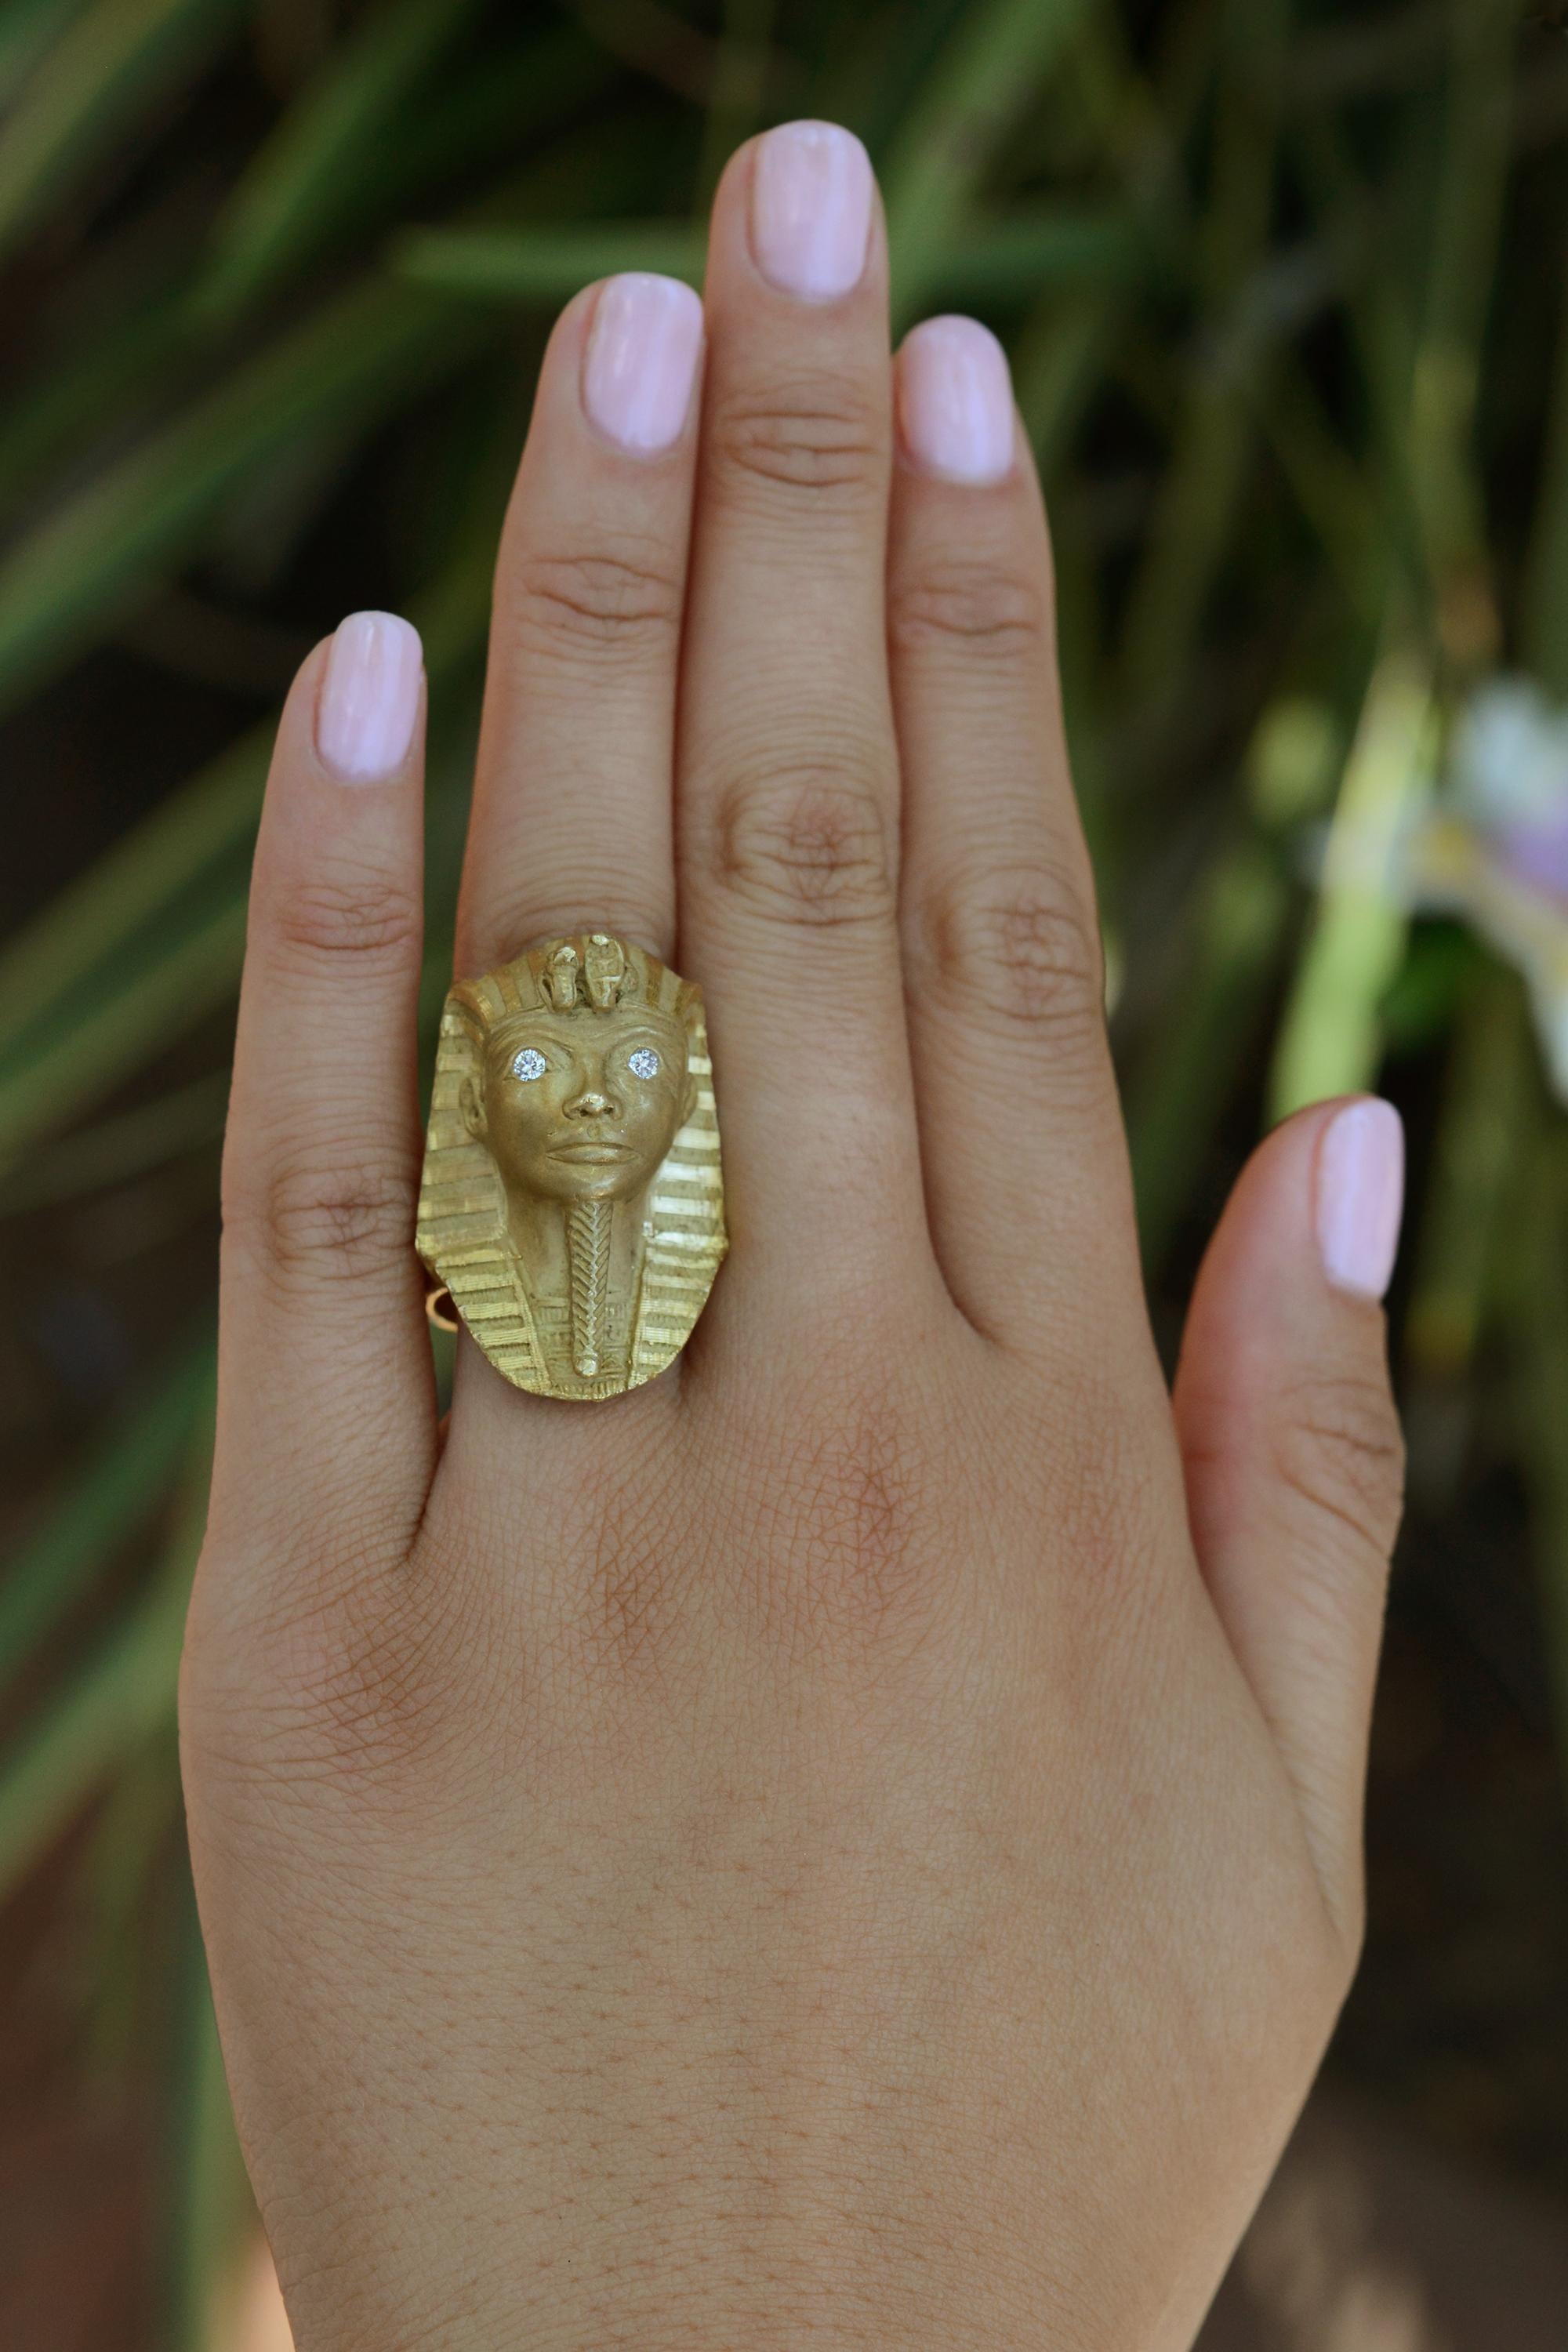 An eye-catching tribute to antiquity, this weighty 18 karat yellow gold King Tut ring is an Egyptian revival treasure. Diamond eye inlays sparkle with timeless beauty, whilst the famed pharaohs crown glints with phenomenal bespoke workmanship. A